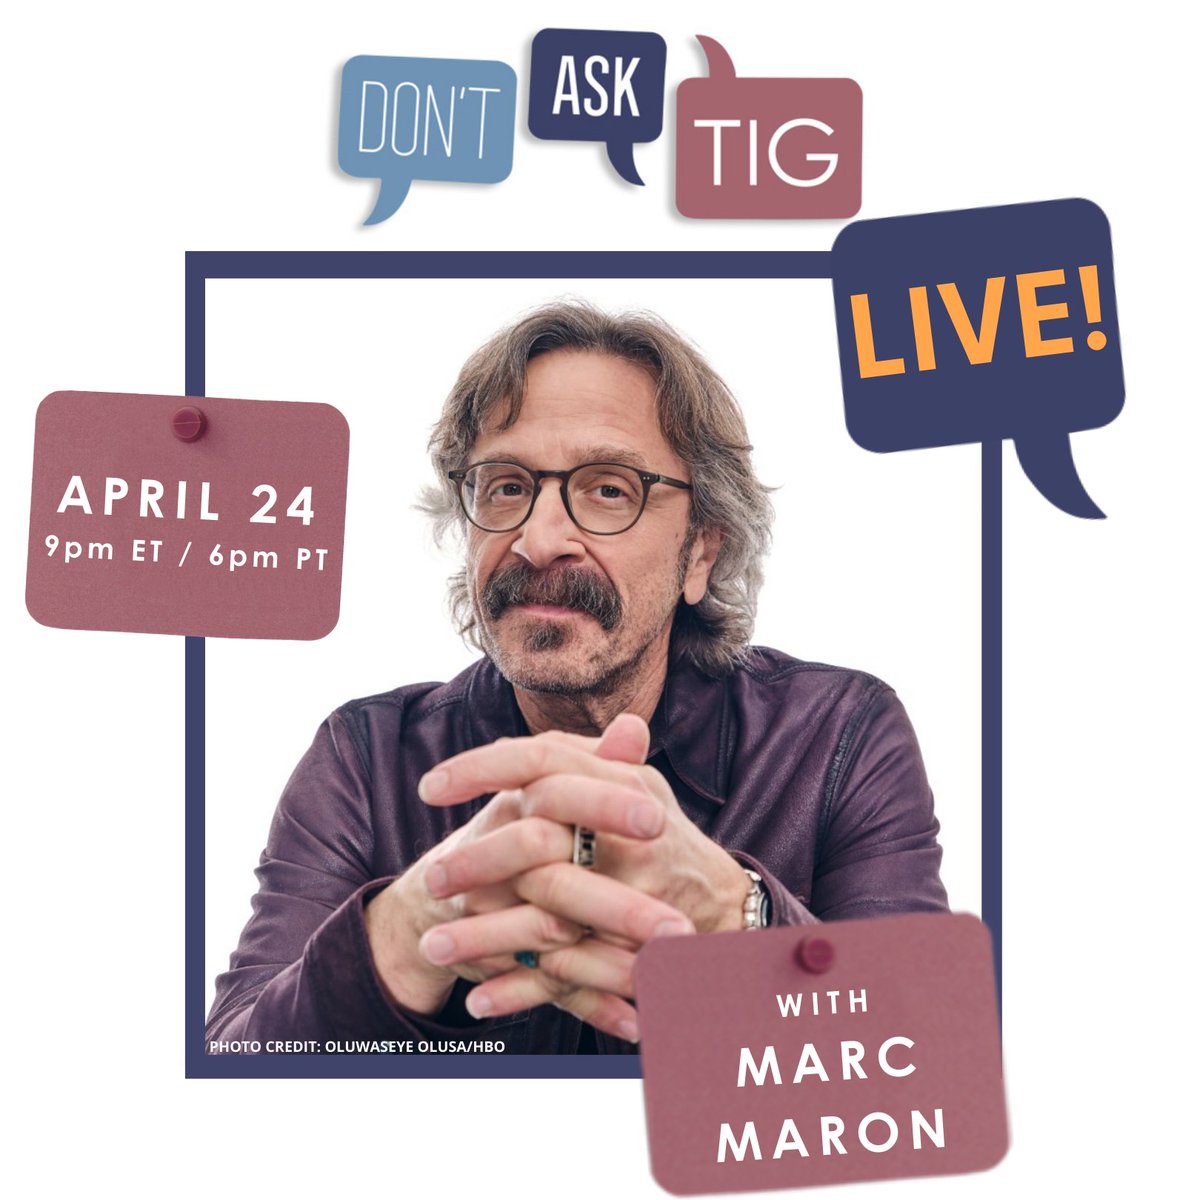 BIG NEWS! On 4/24, @TigNotaro will be joined by @marcmaron @WTFpod for a virtual show that YOU can join! Ticket holders will have a chance to submit Qs to Tig & Marc. 10 lucky folks will be a part of a special surprise during the broadcast! Register: support.americanpublicmedia.org/dontasktig-eve…